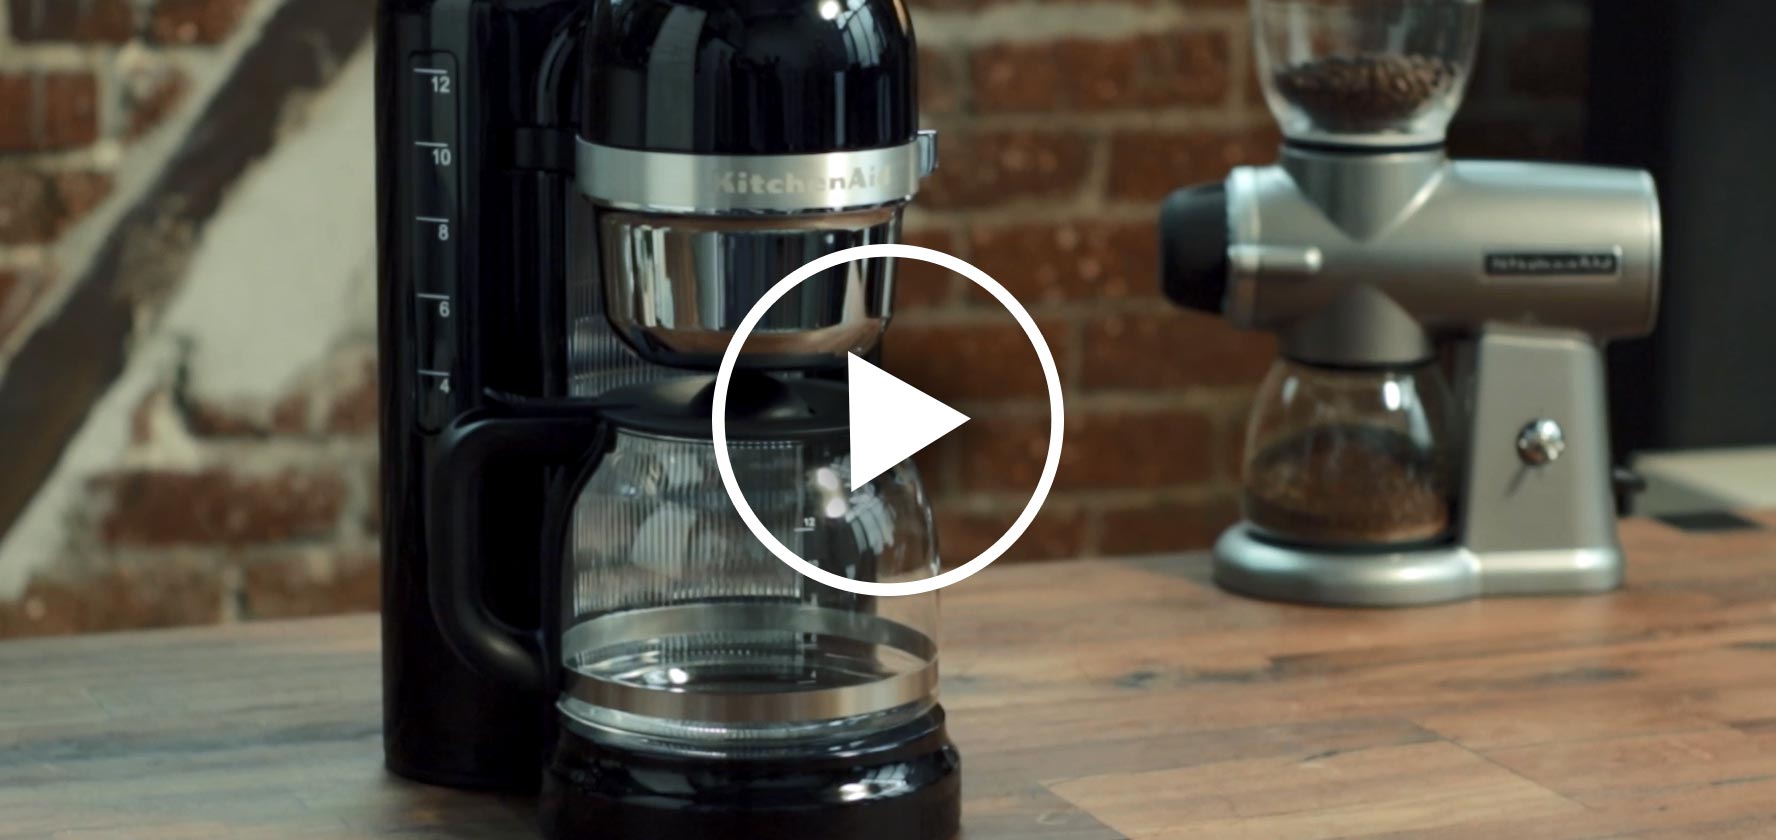 New Craft Coffee Products from KitchenAid